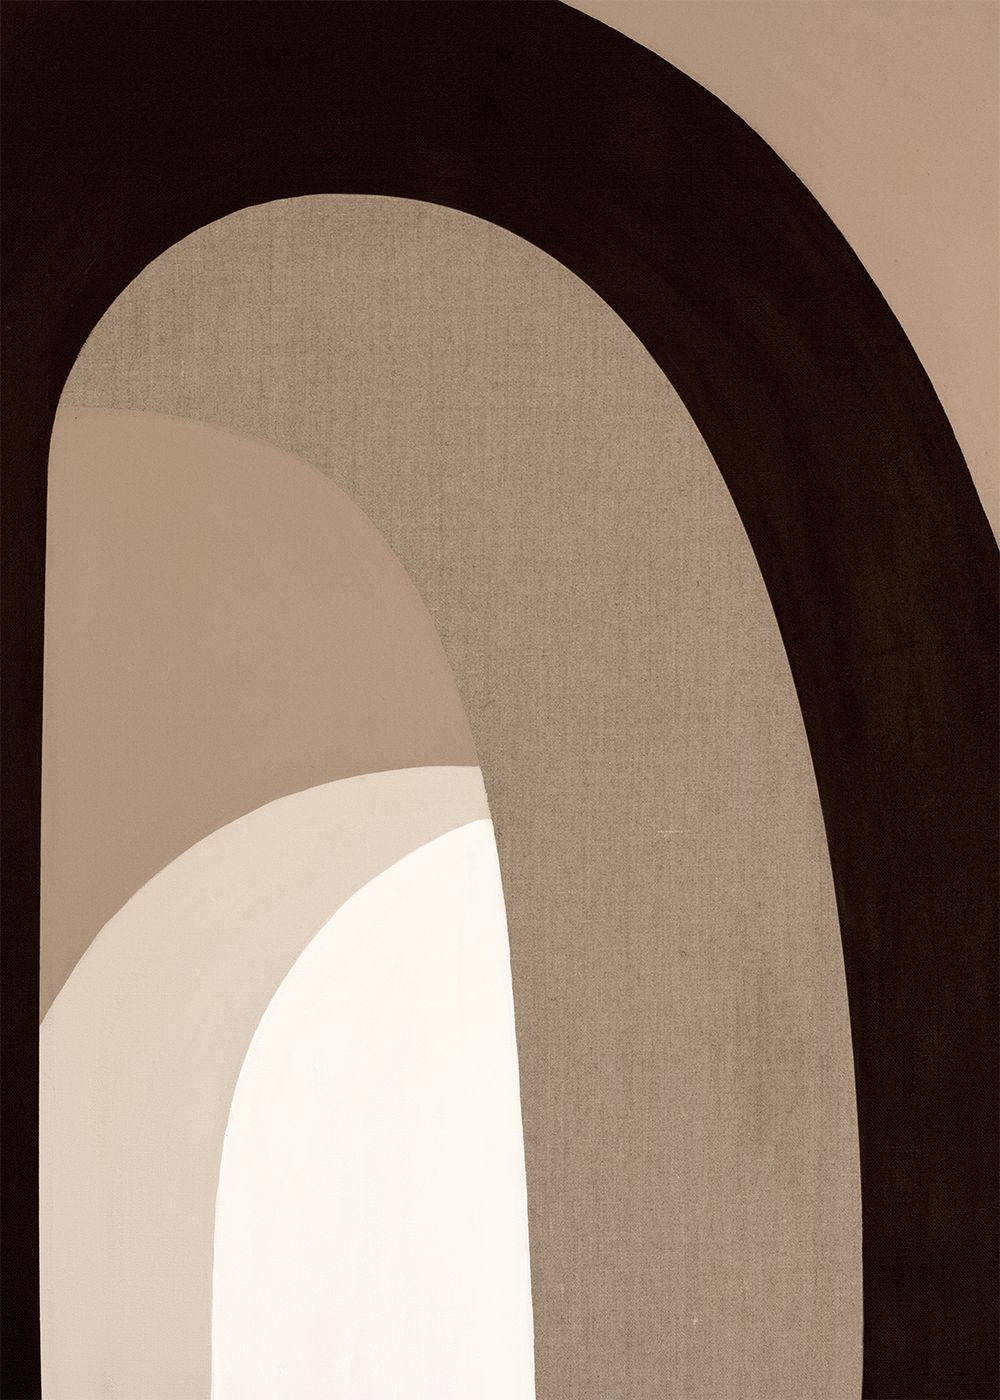 Paper Collective The Arch 01 Affiche, 50x70 cm